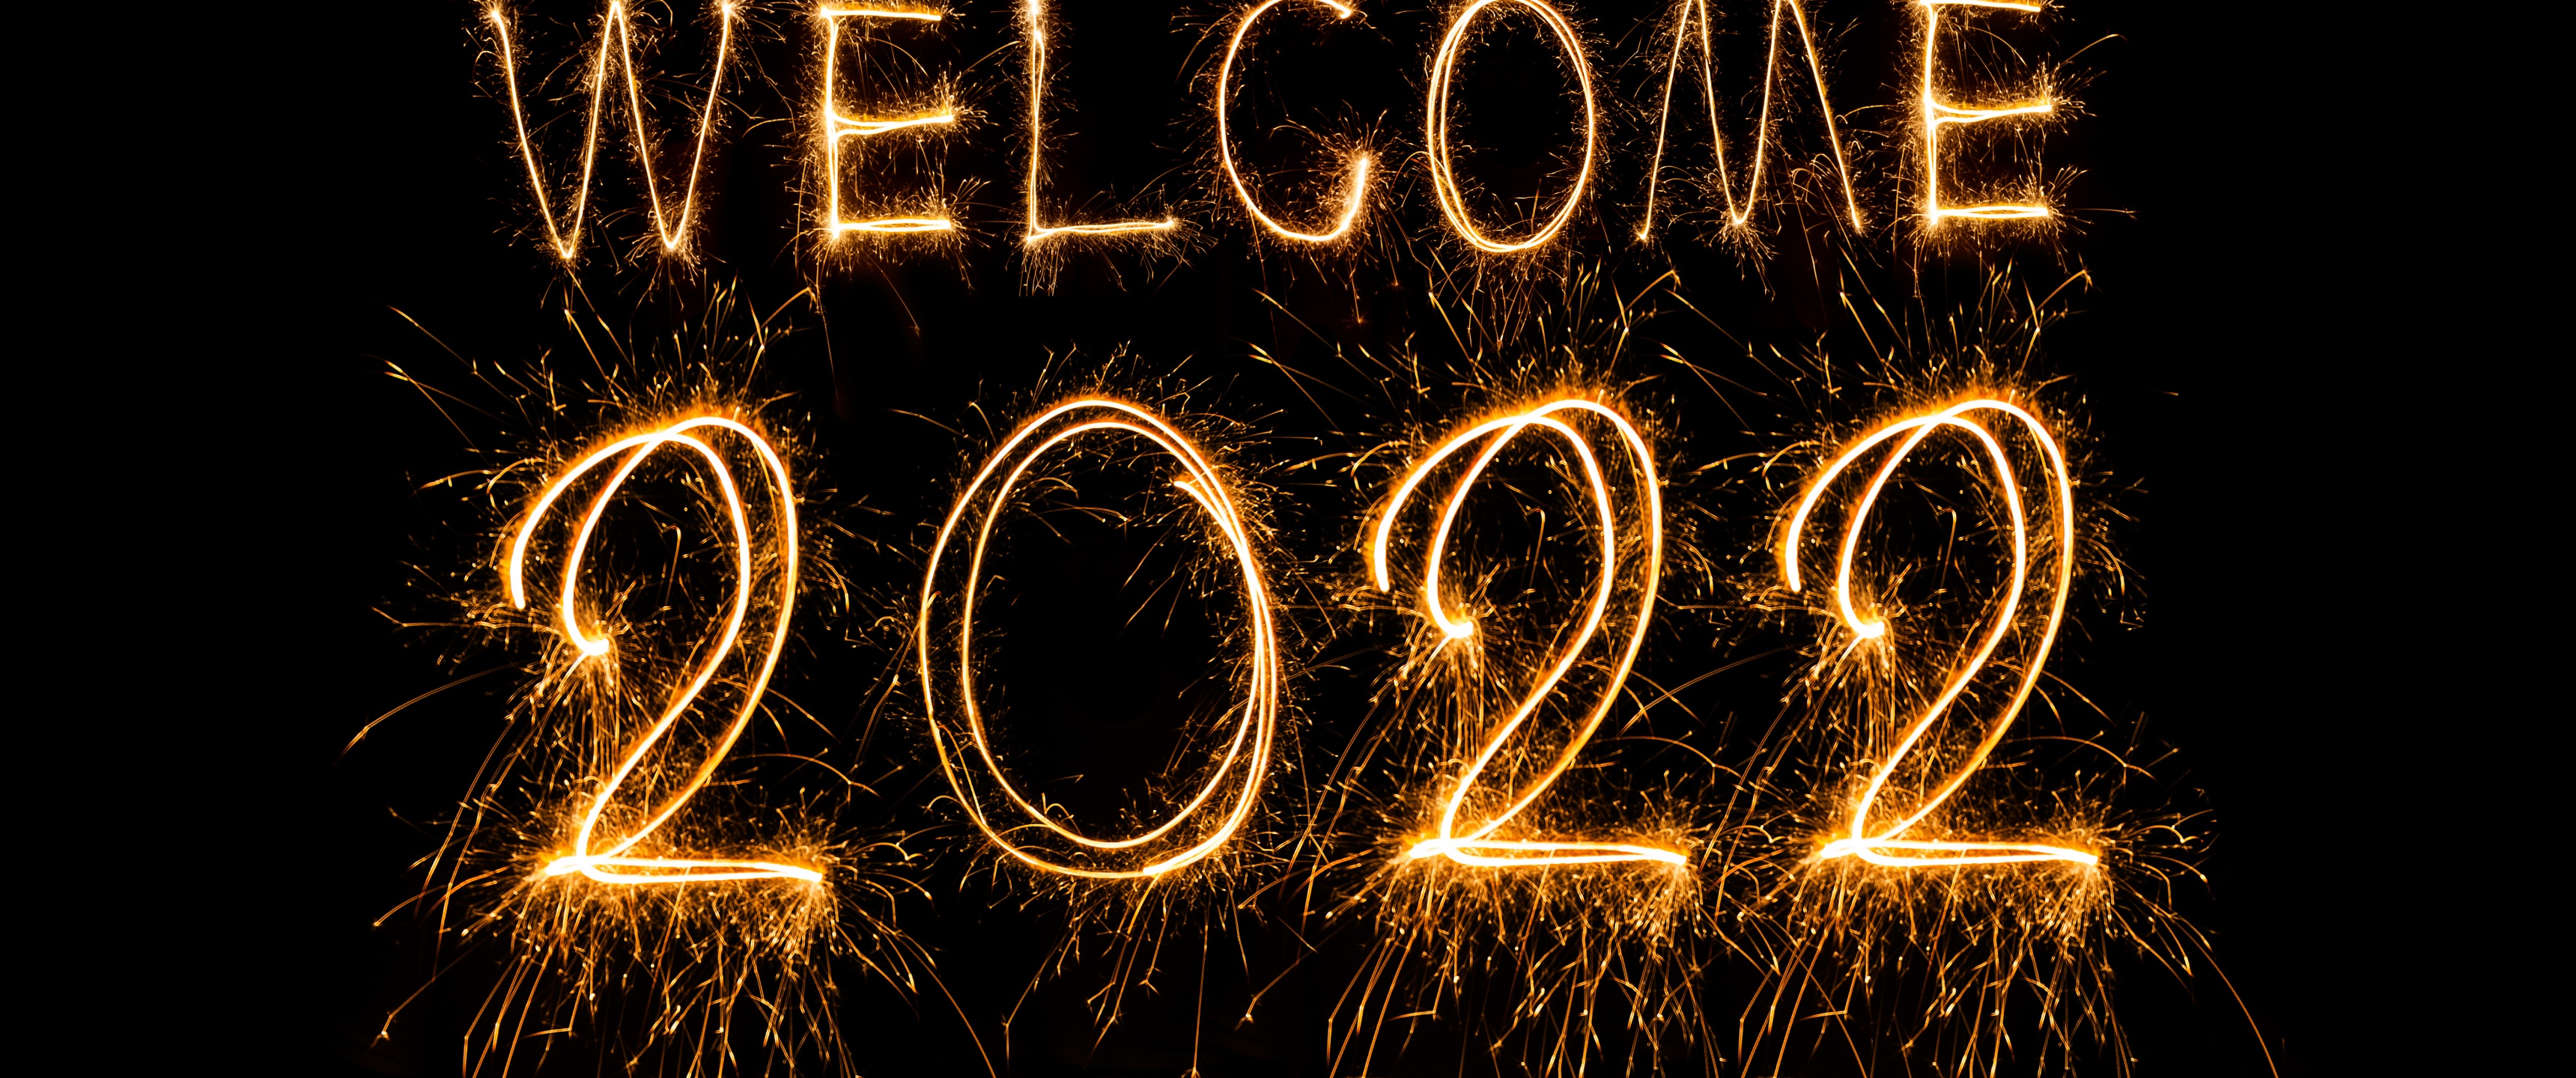 Welcome 2022 Wallpaper 4K, 2022 New Year, Celebrations/New Year, #6995